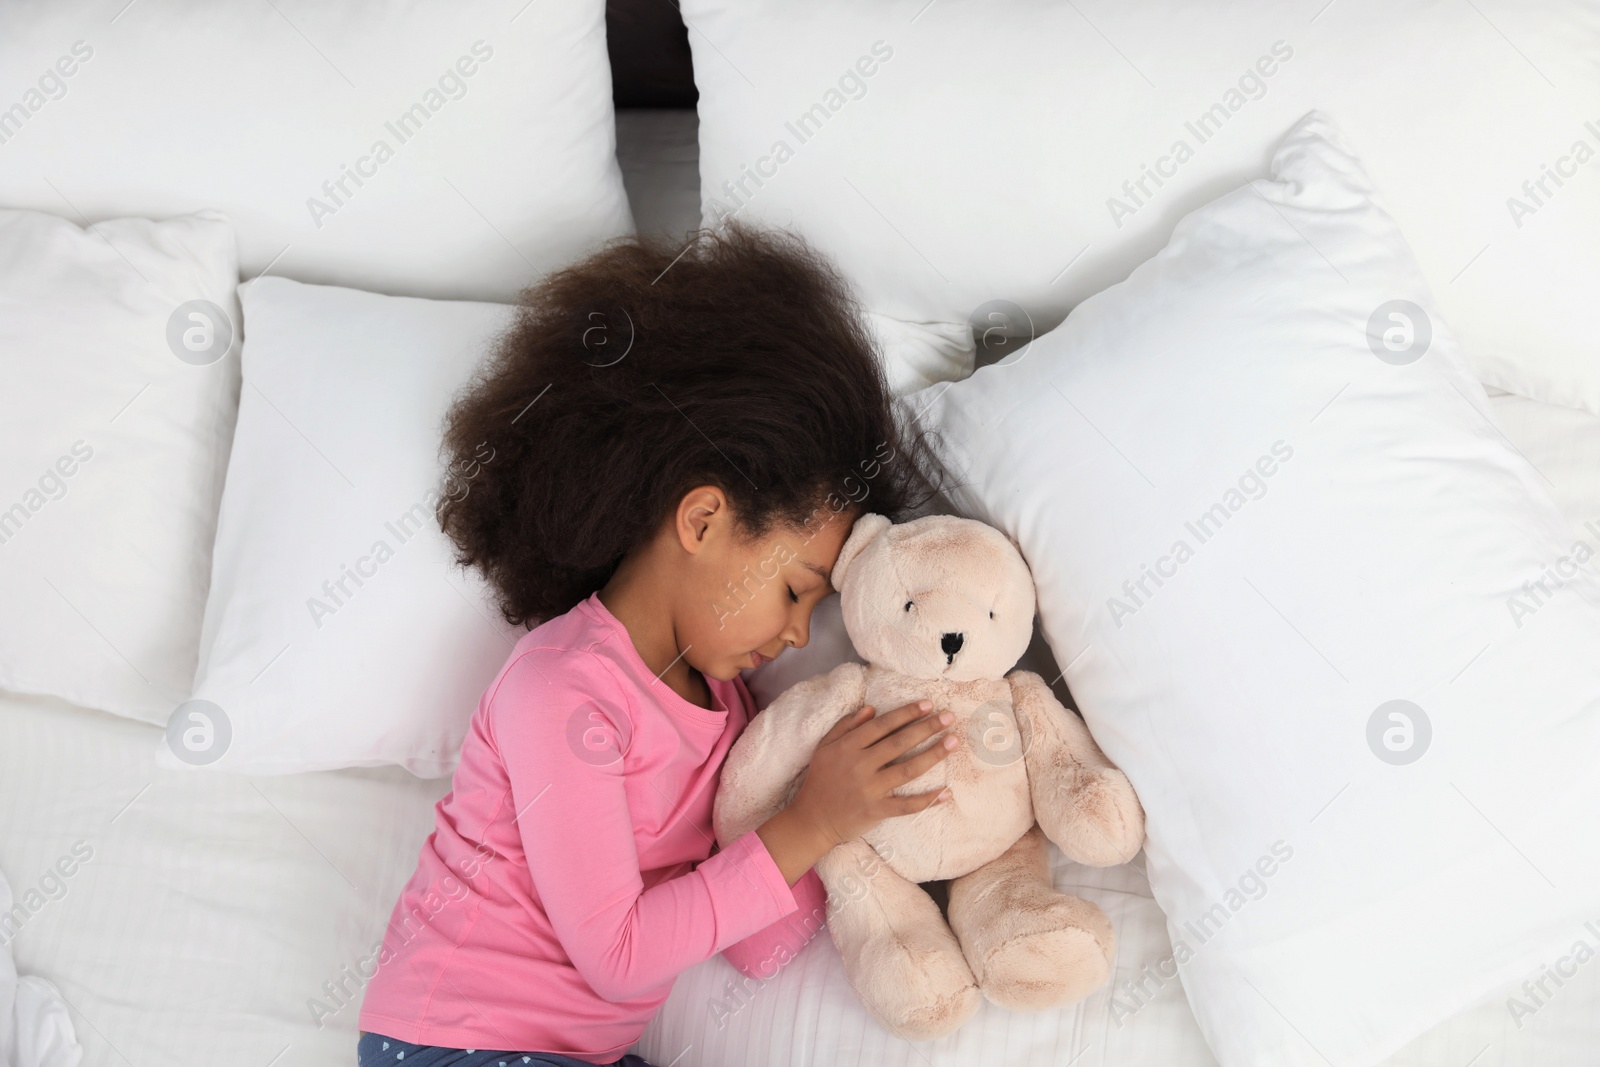 Photo of Cute little African-American girl with teddy bear sleeping in bed, top view